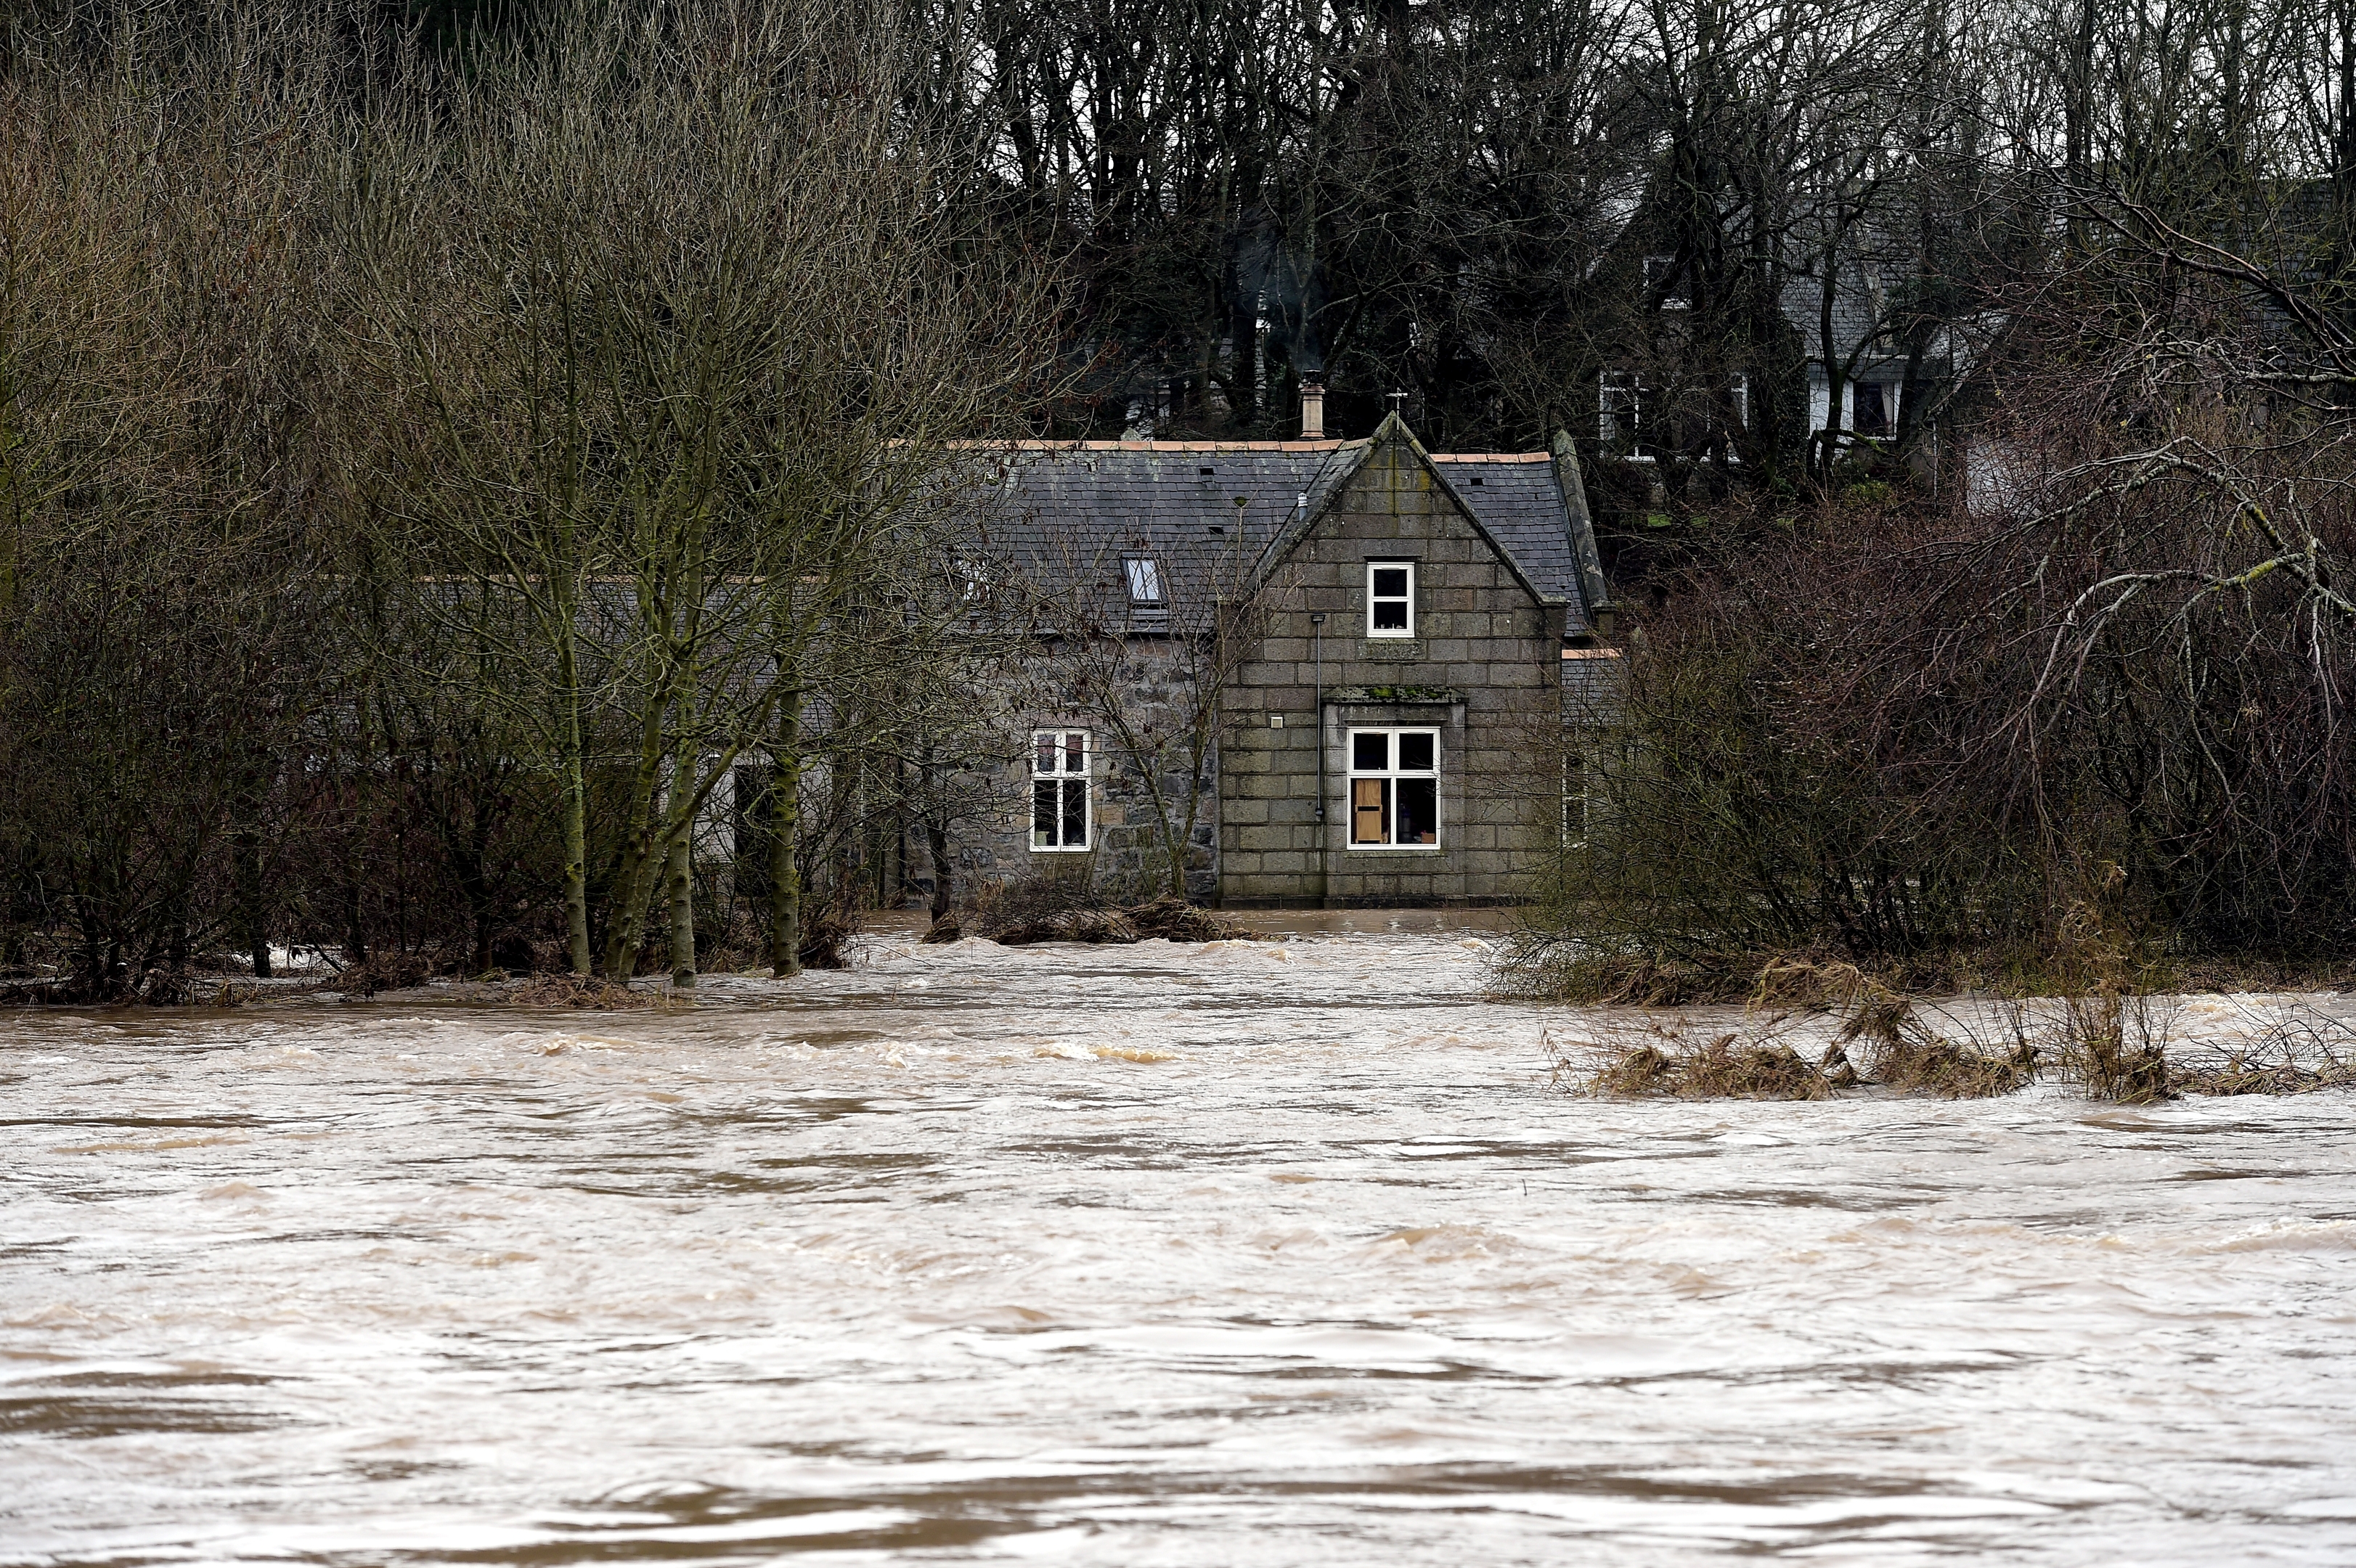 The River Ythan has burst it's banks at Ellon. The home of George Thomson on the banks of the Ythan near the old bridge which was flooded last night. 